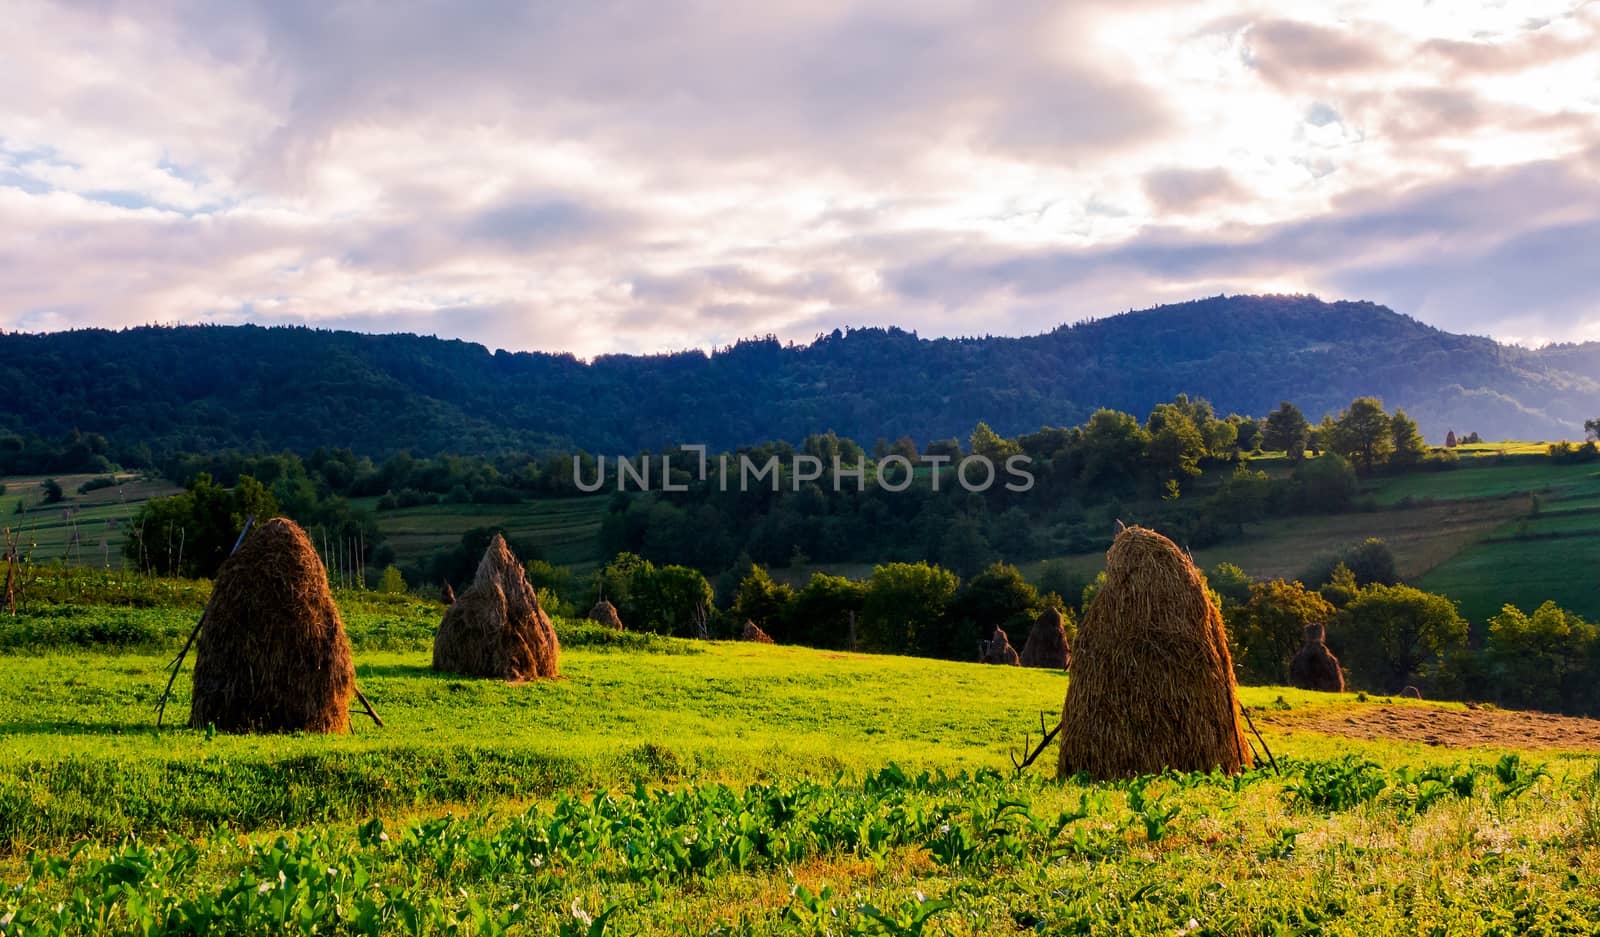 haystacks on the grassy field in mountains by Pellinni